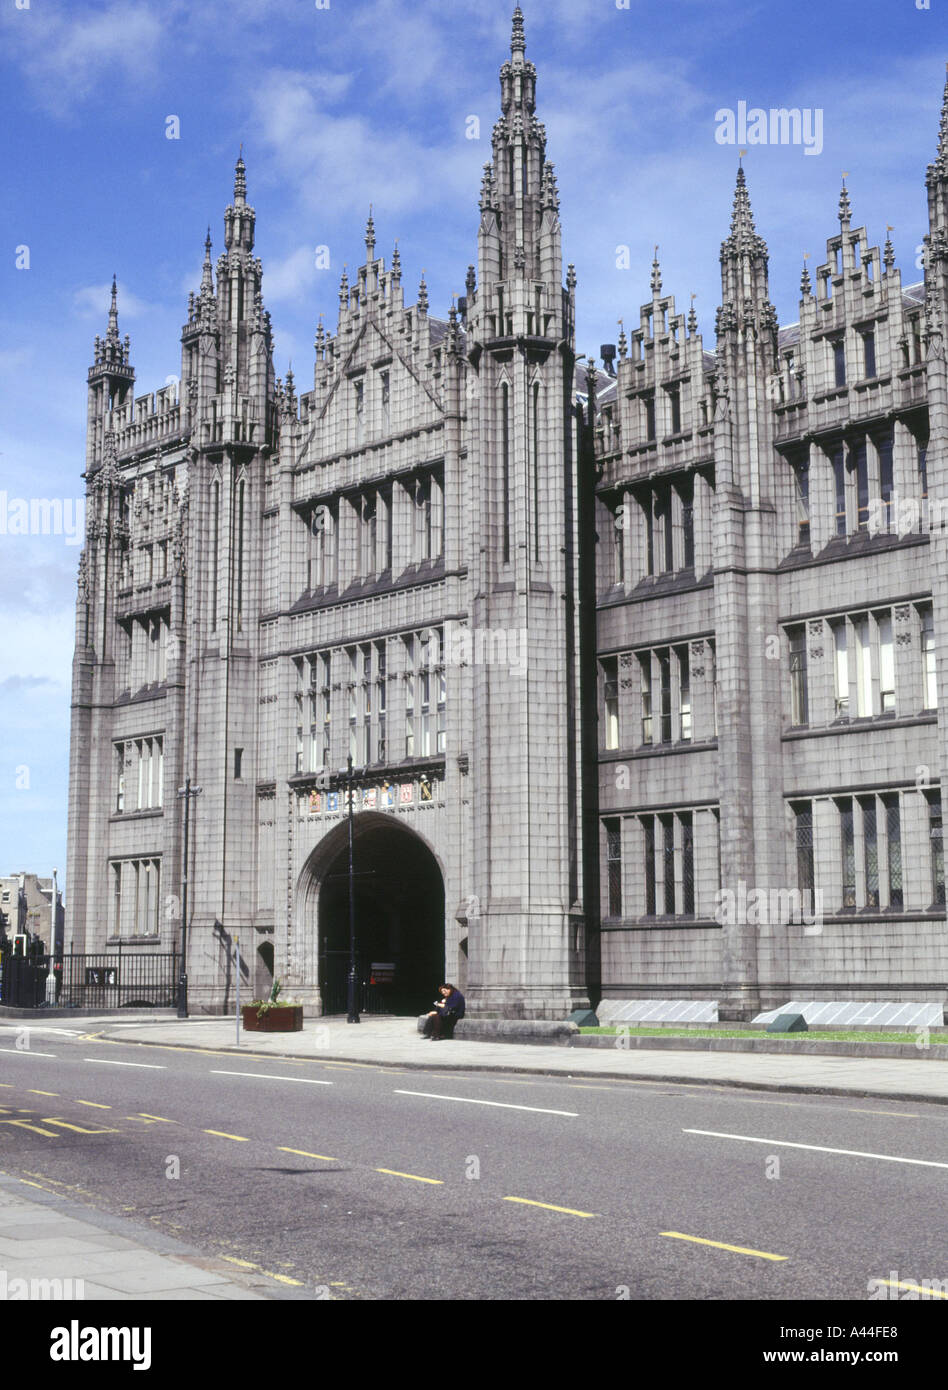 dh MARISCHAL COLLEGE ABERDEEN Frontage of college buildings council building granite scotland architectur Stock Photo